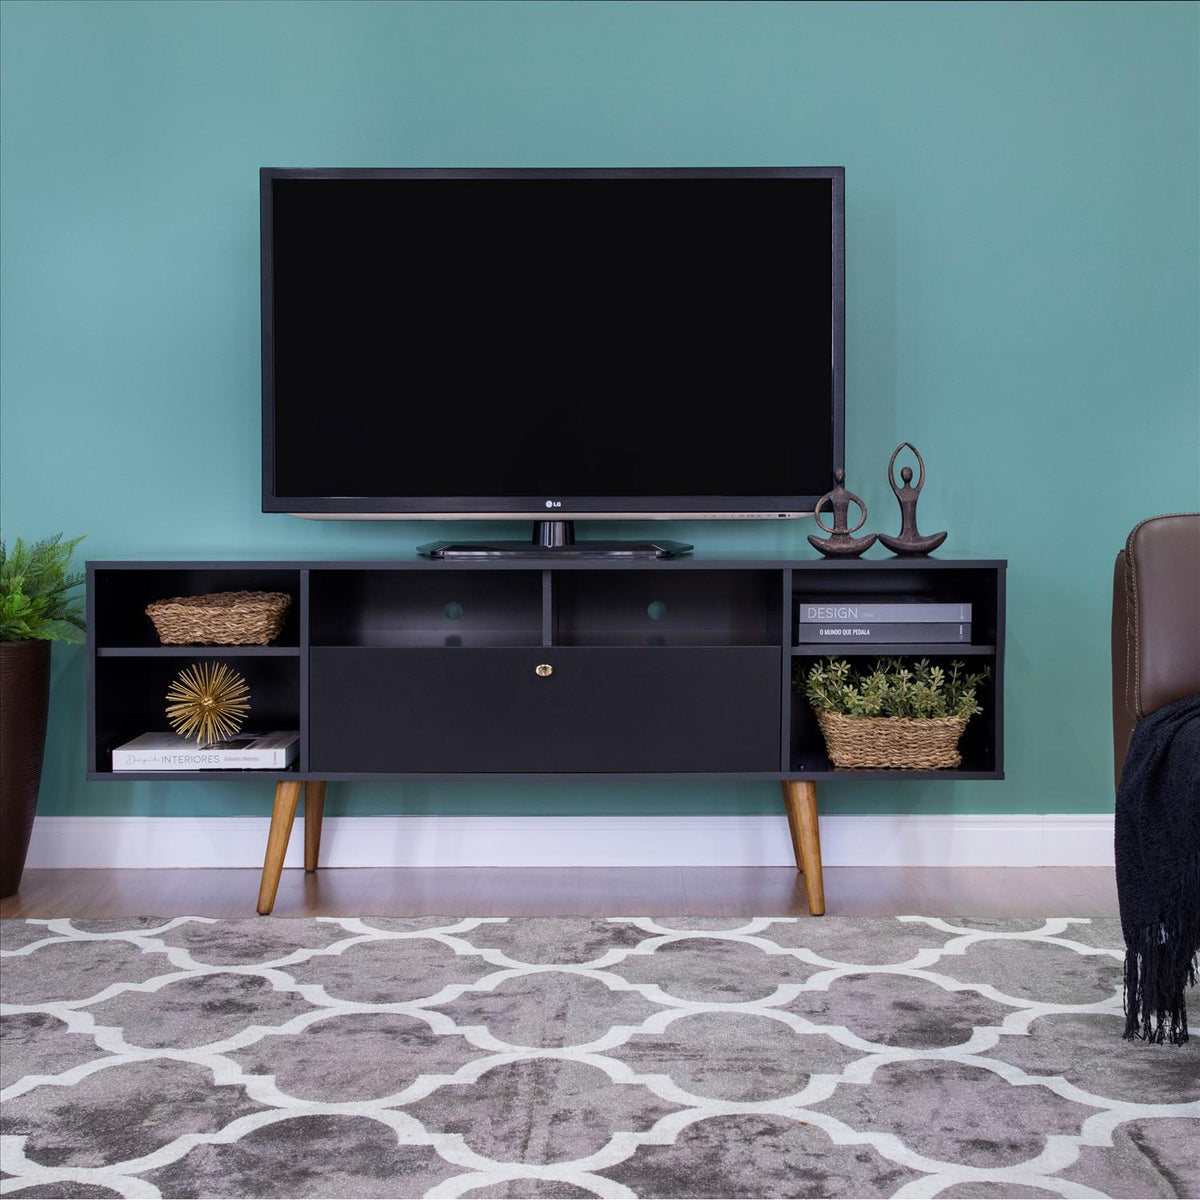 63 Inch TV Entertainment Media console with Drop Down Cabinet, Black, Brown - UPT-262092